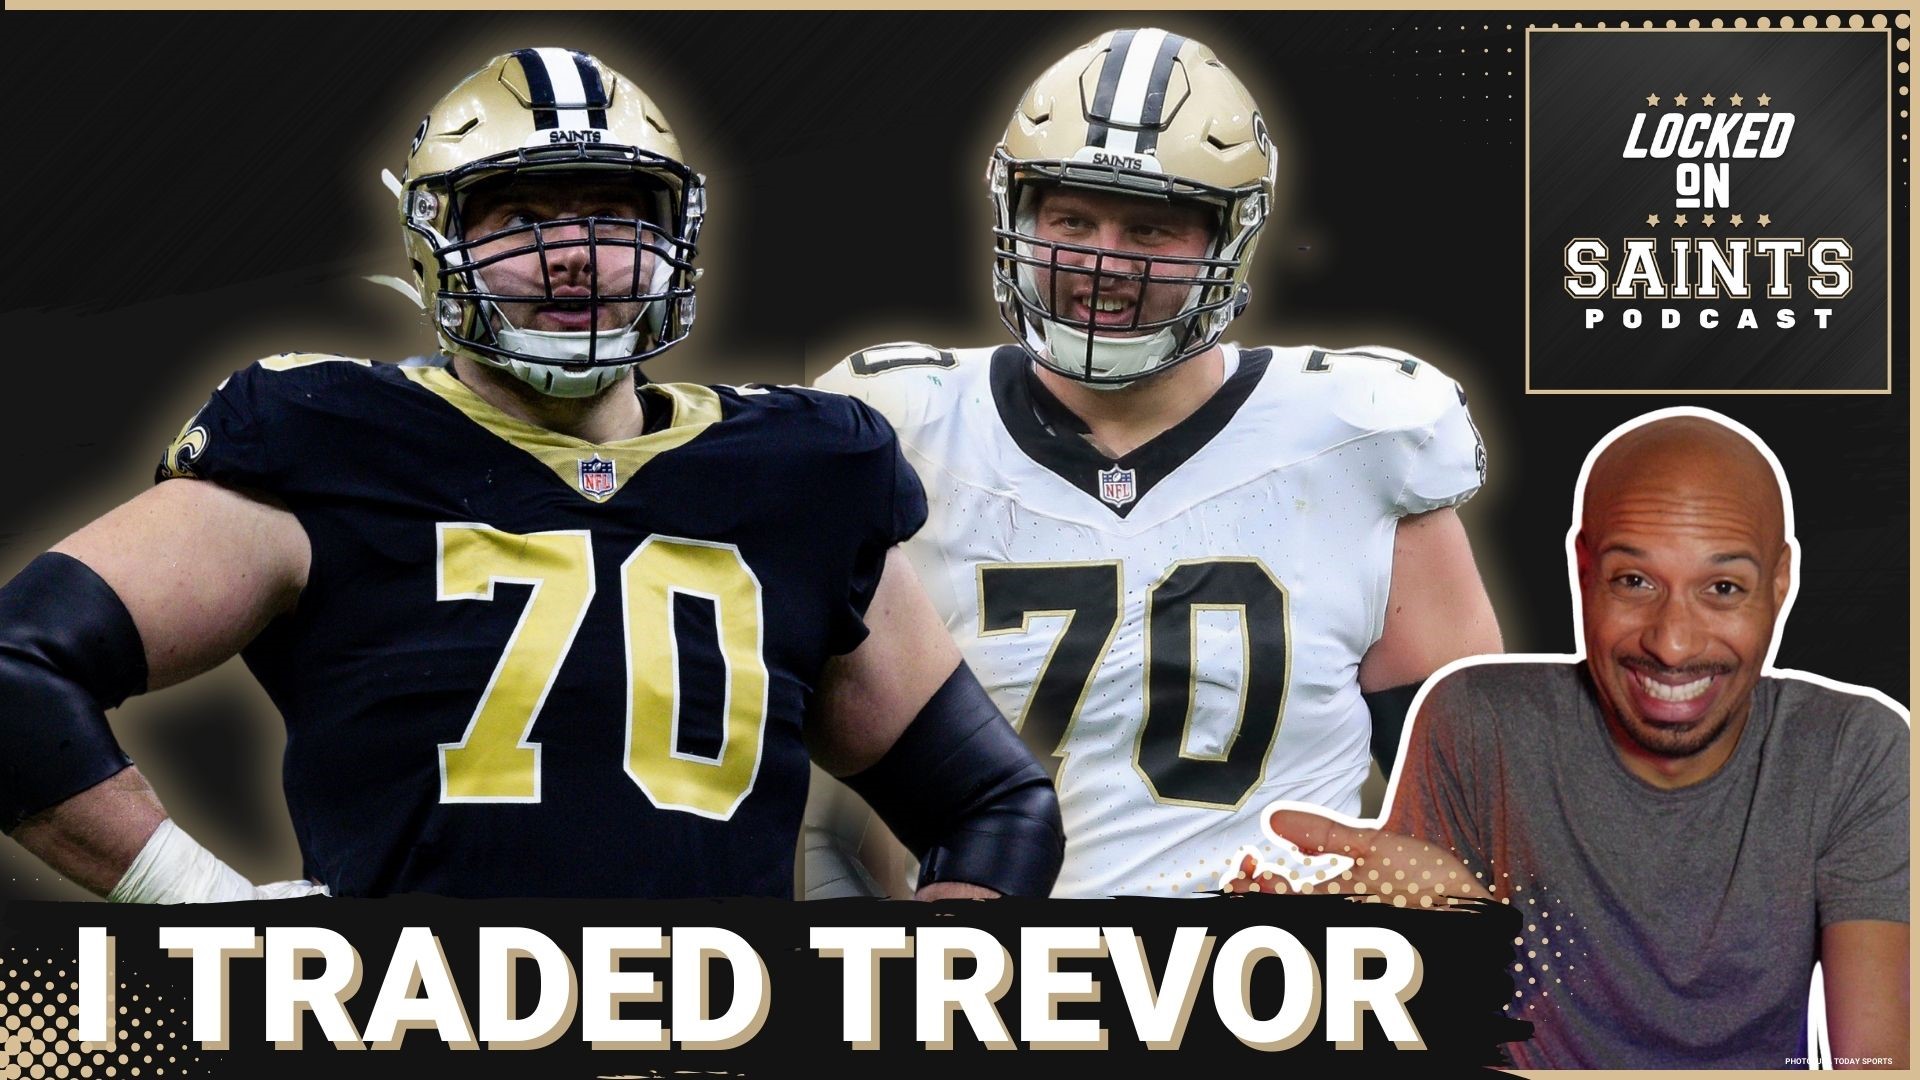 This New Orleans Saints mock draft got crazy with Trevor Penning being traded away to move up and grab a second first-round pick.